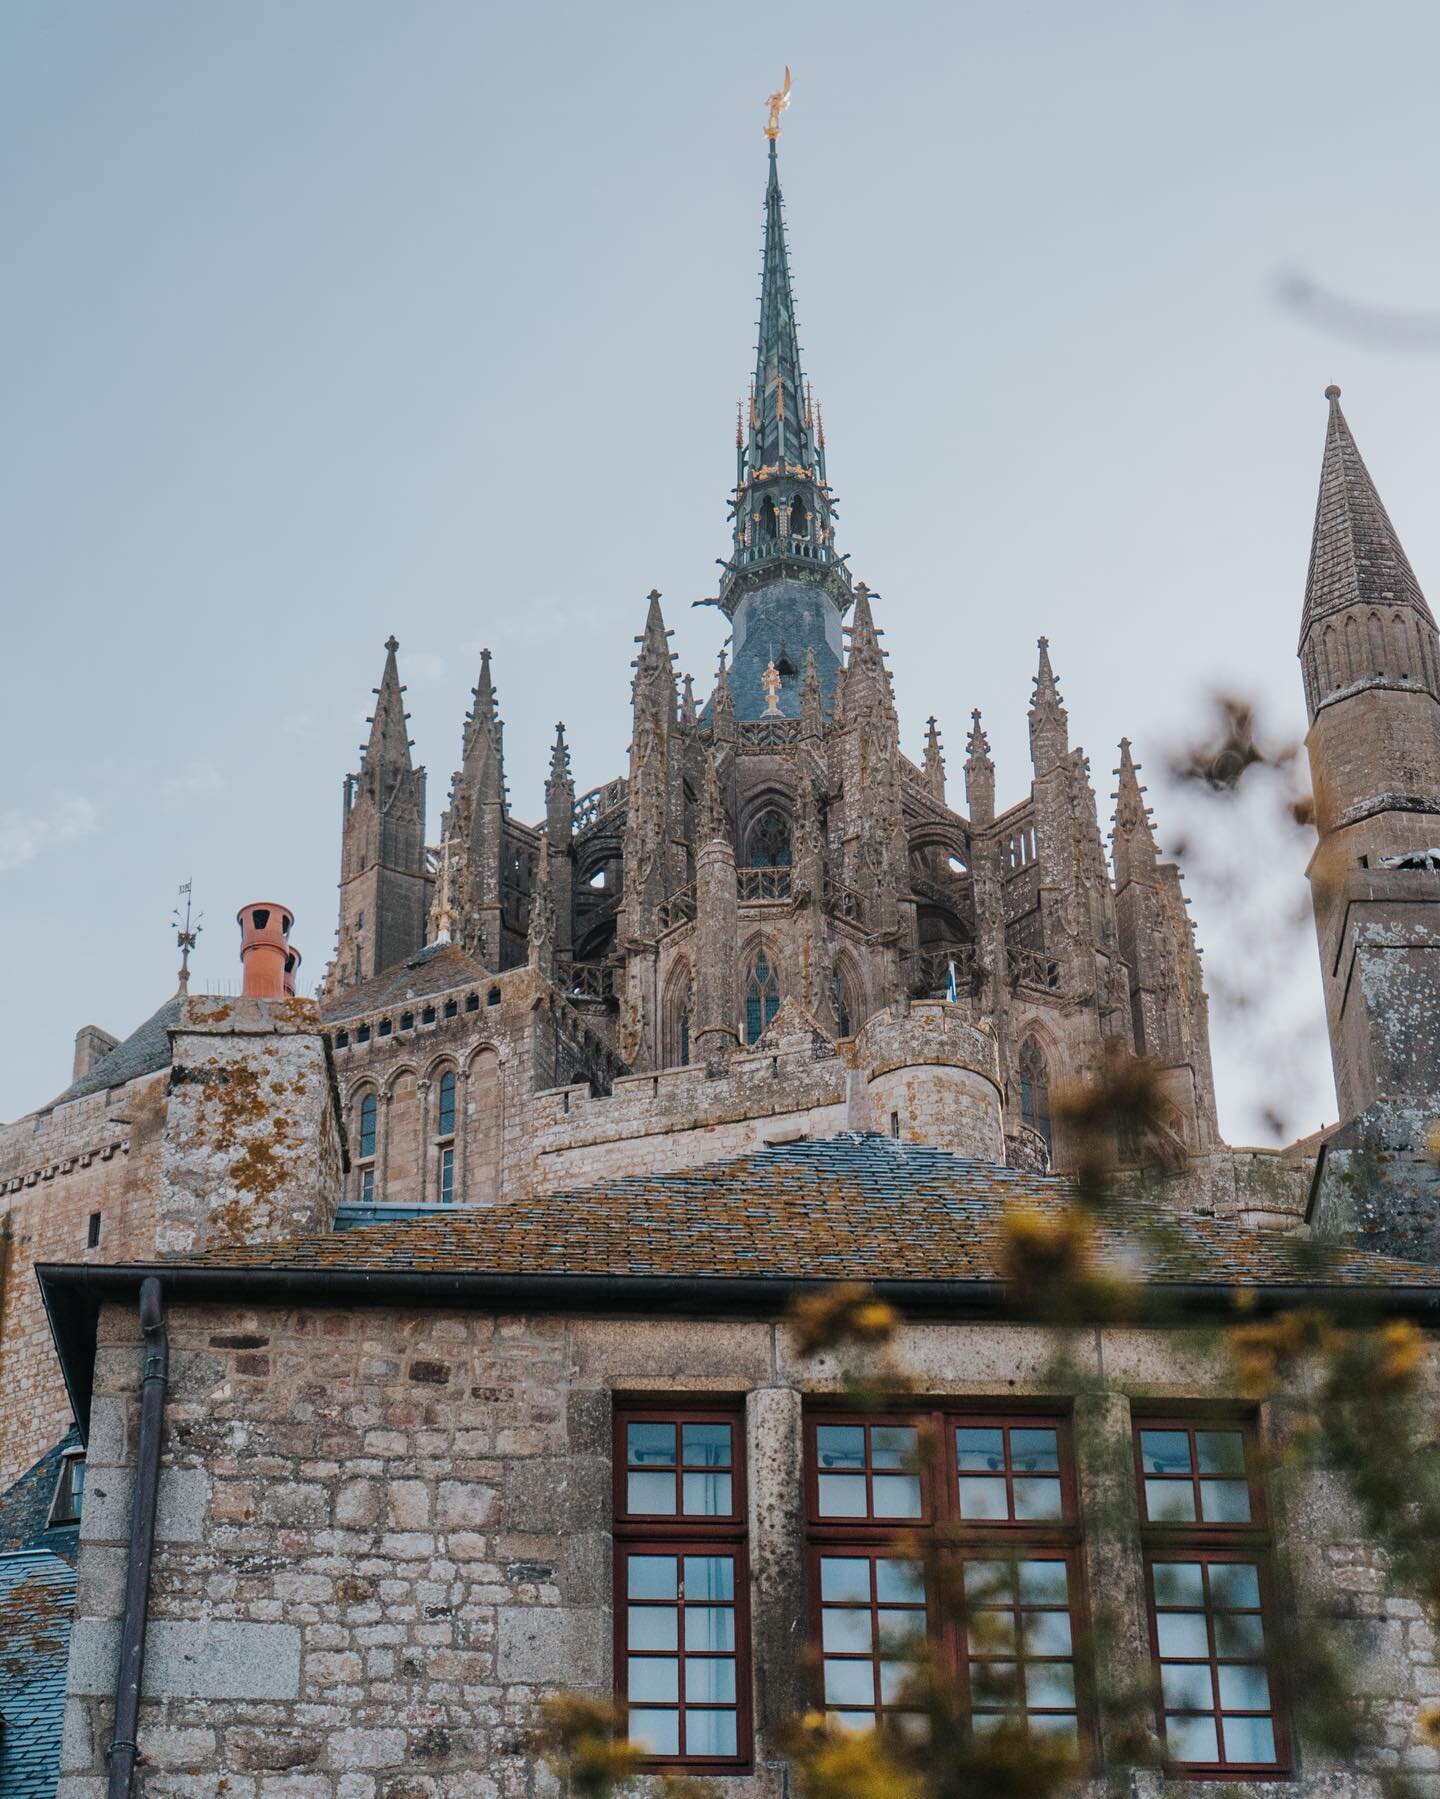 Some impressions from the Mont-Saint-Michel✨